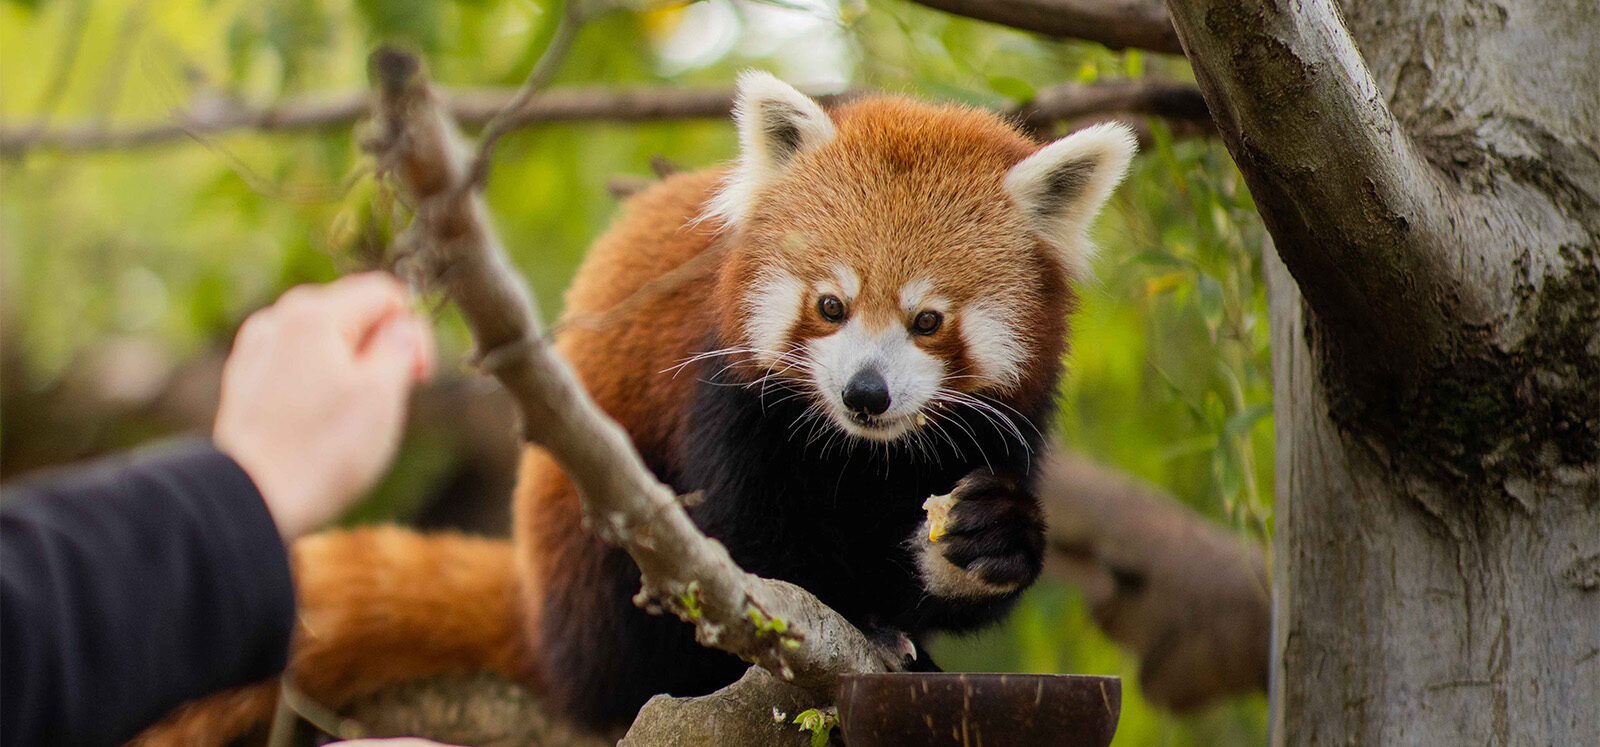 Red Panda perched on tree branch gripping fruit in paw with crumbs on chin